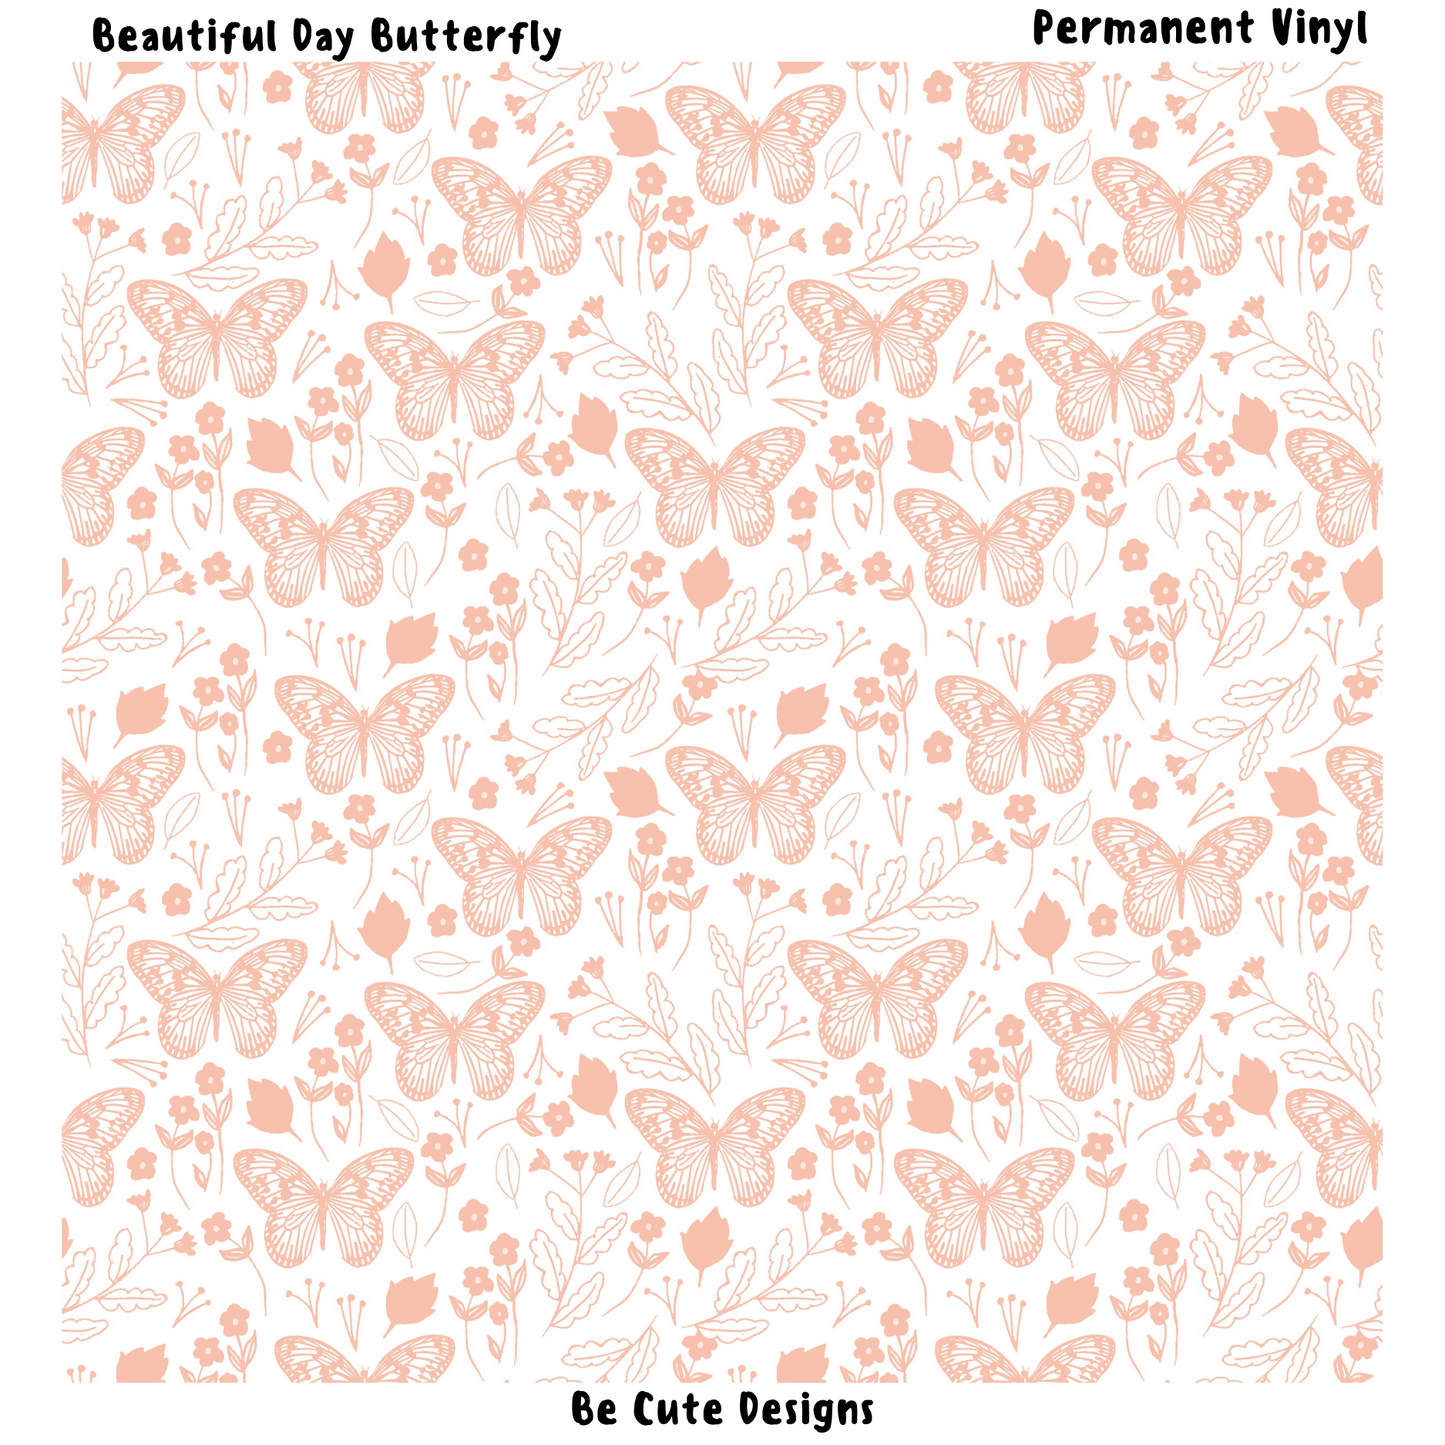 Beautiful Day Butterfly Patterned Vinyl